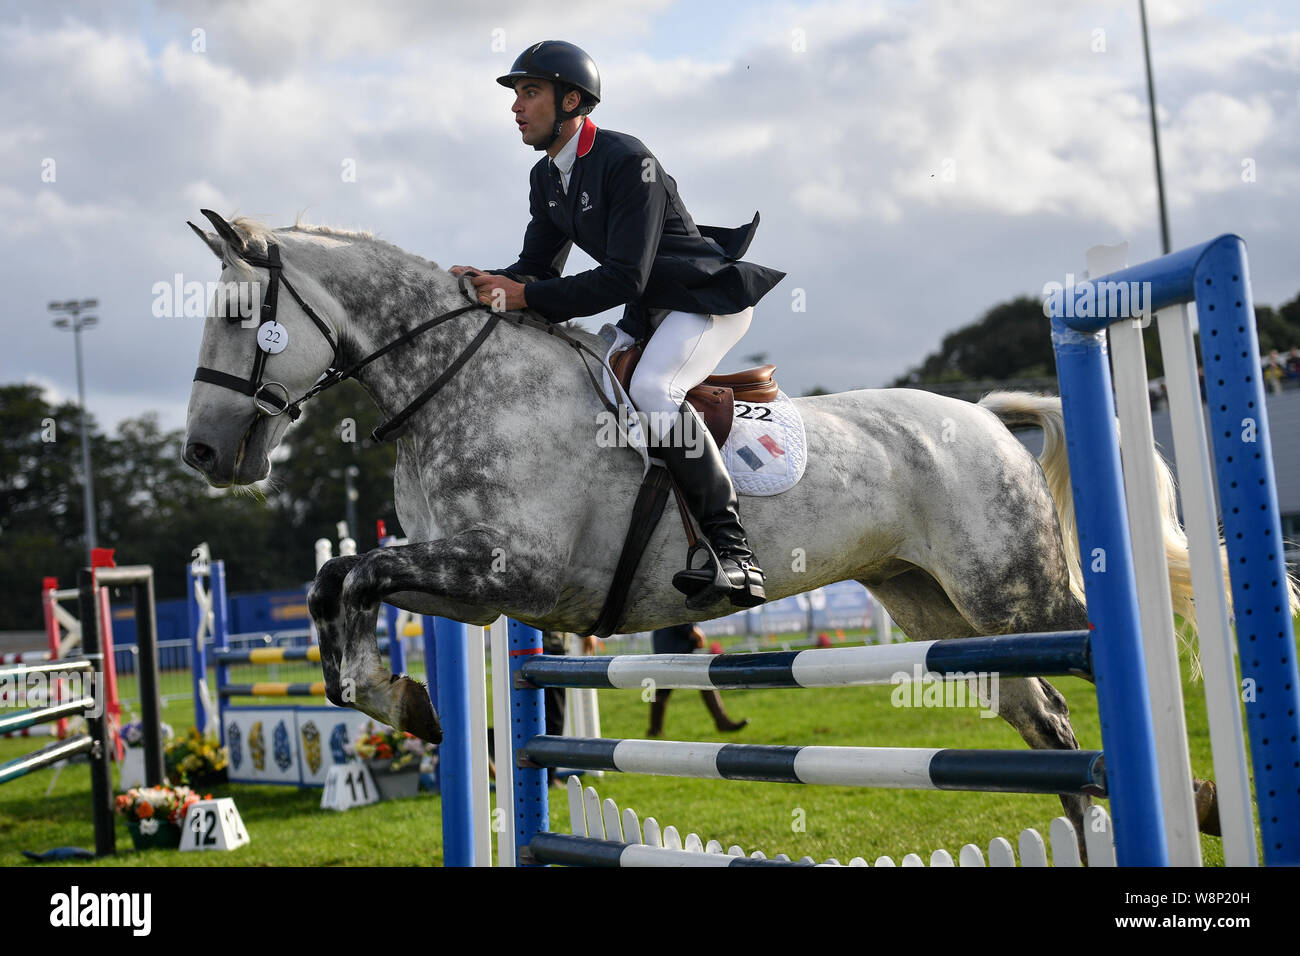 Valentin Prades of France during day five of the 2019 European Modern Pentathlon Championships at the University of Bath. Stock Photo